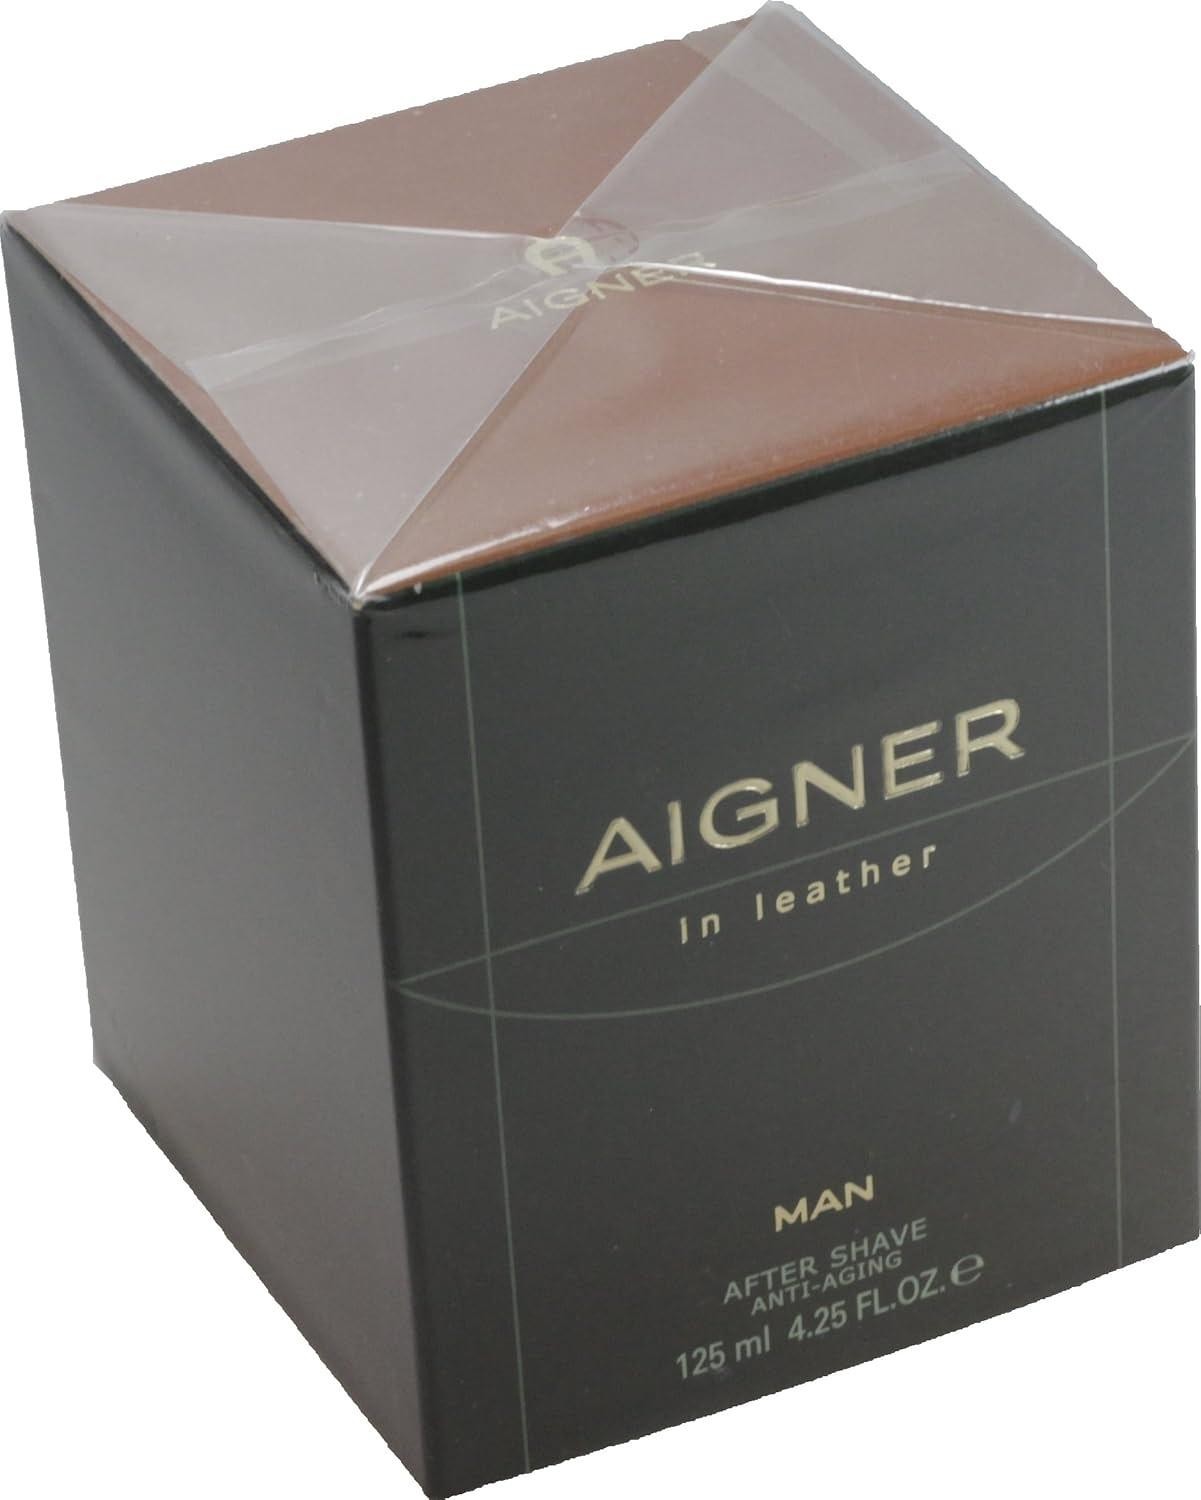 Etienne Aigner In Leather Man After Shave Lotion 125ml